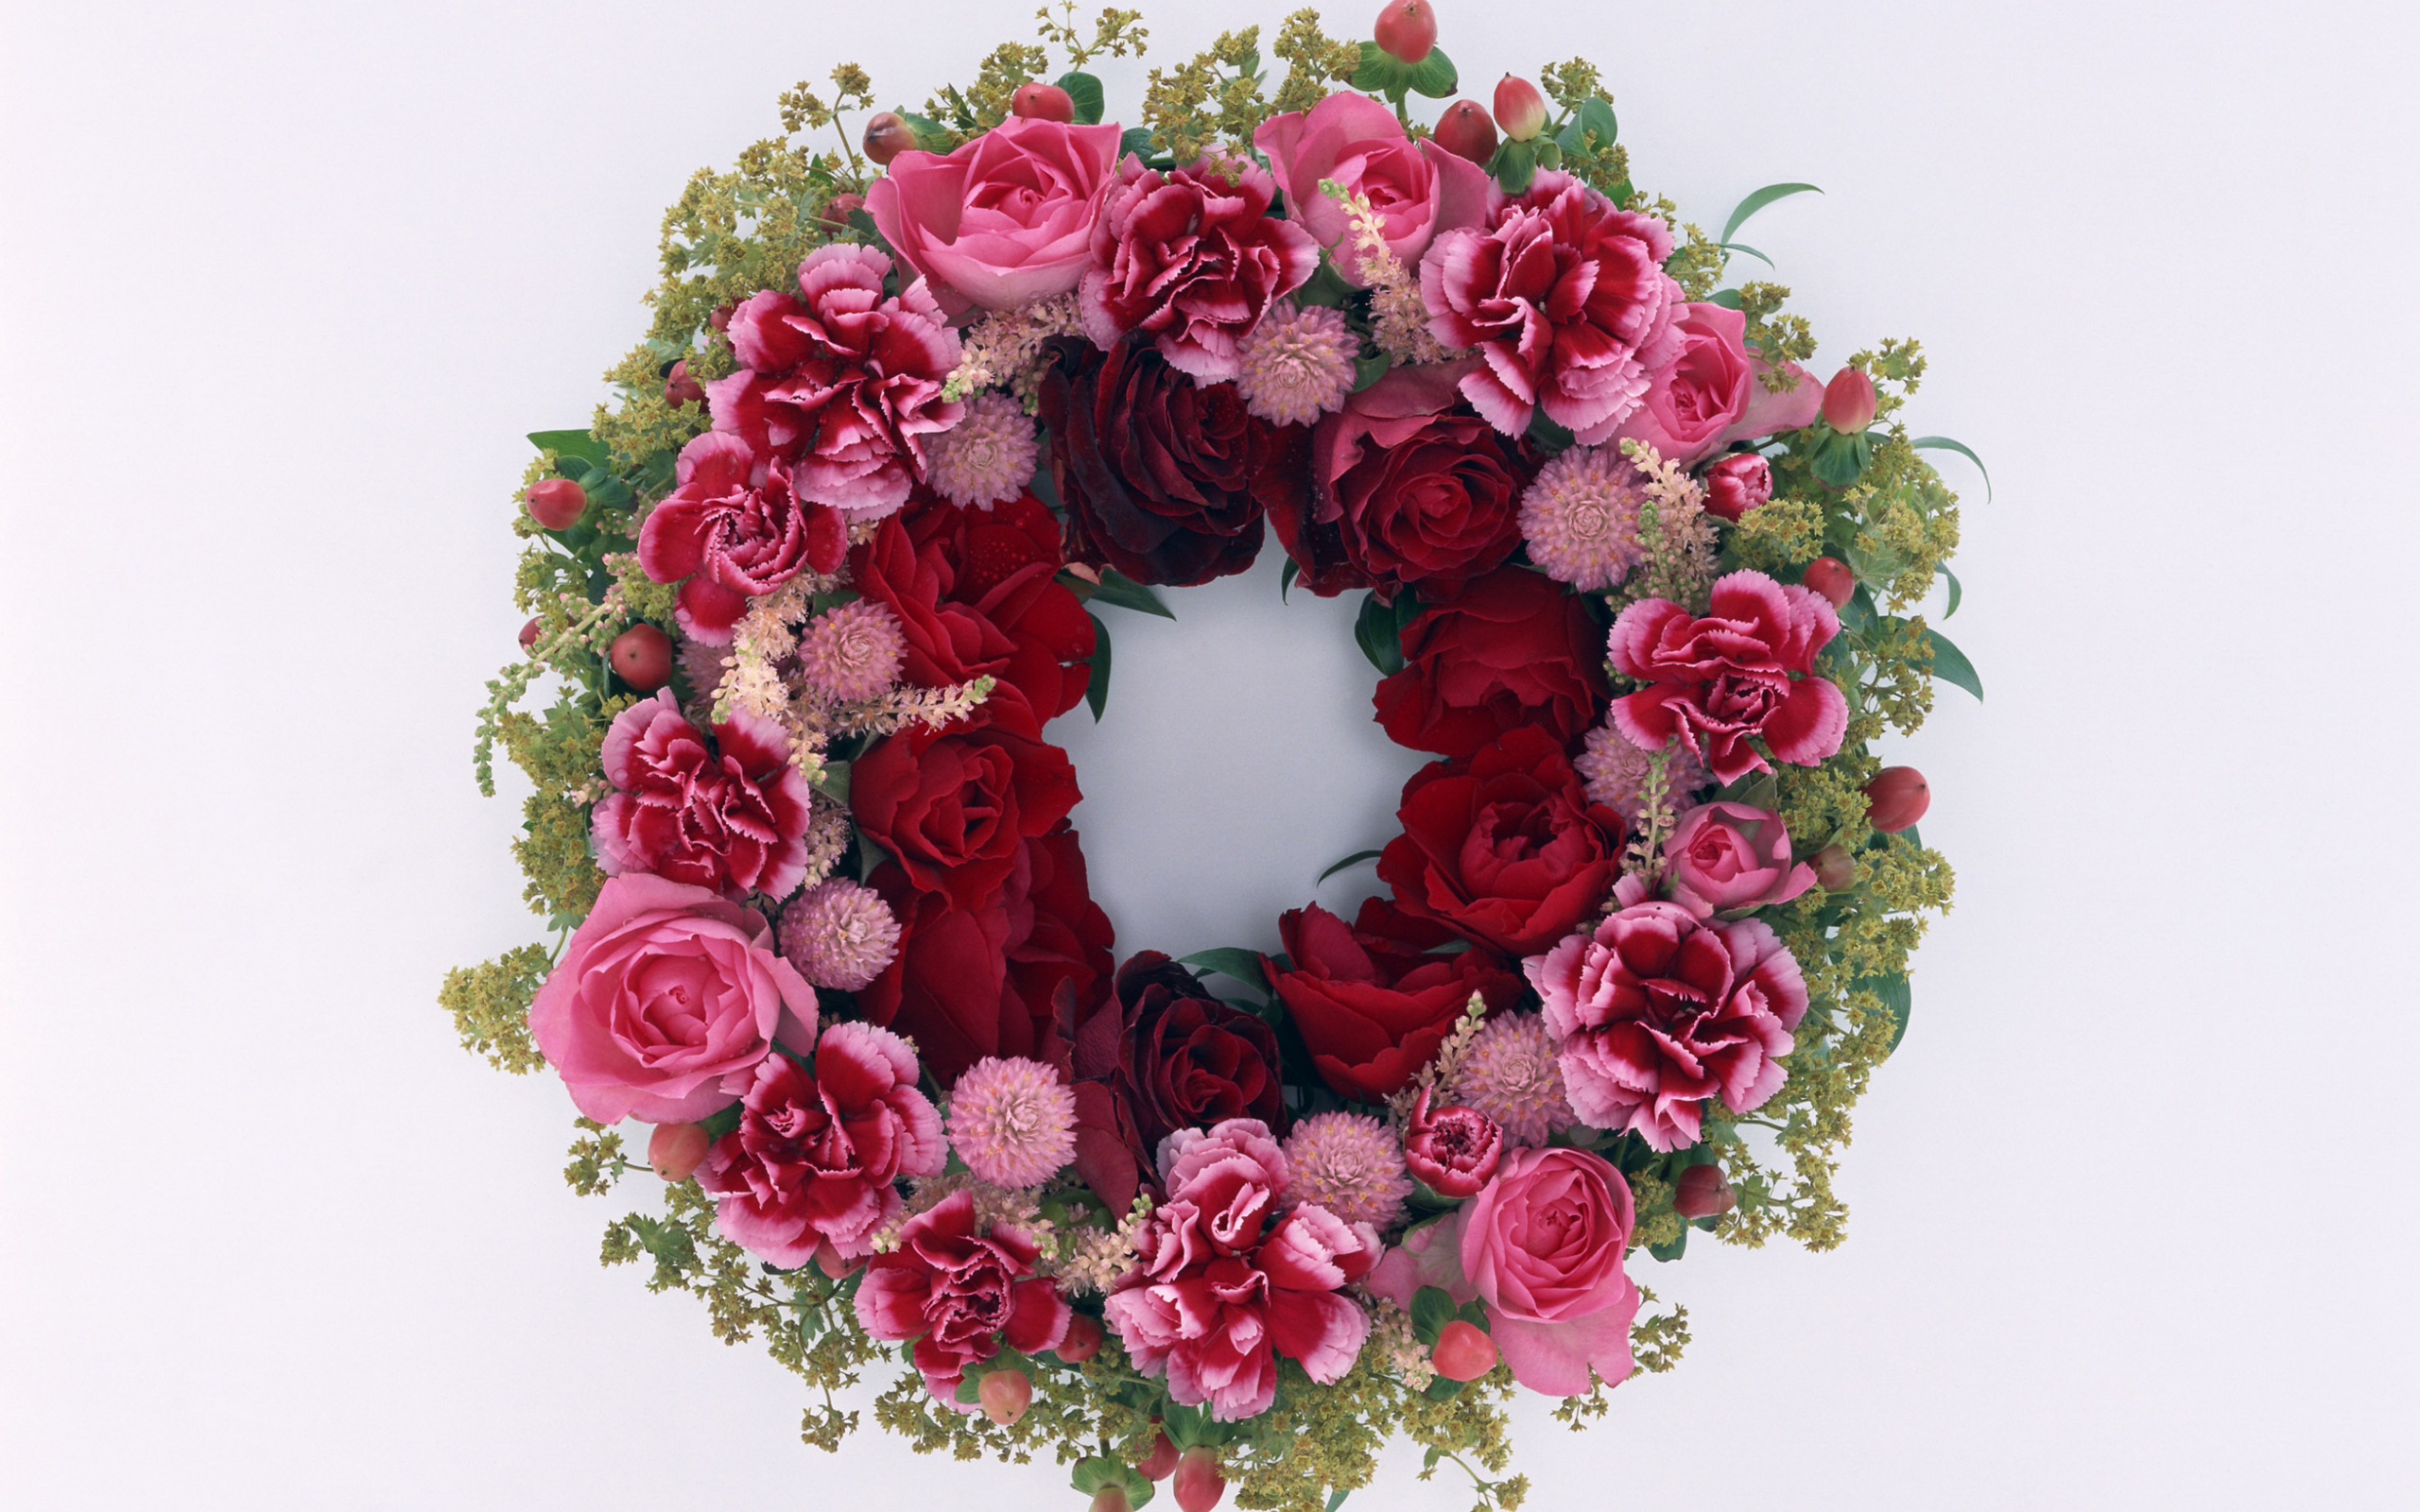 Wreath and red roses with carnation flowers on a gray background